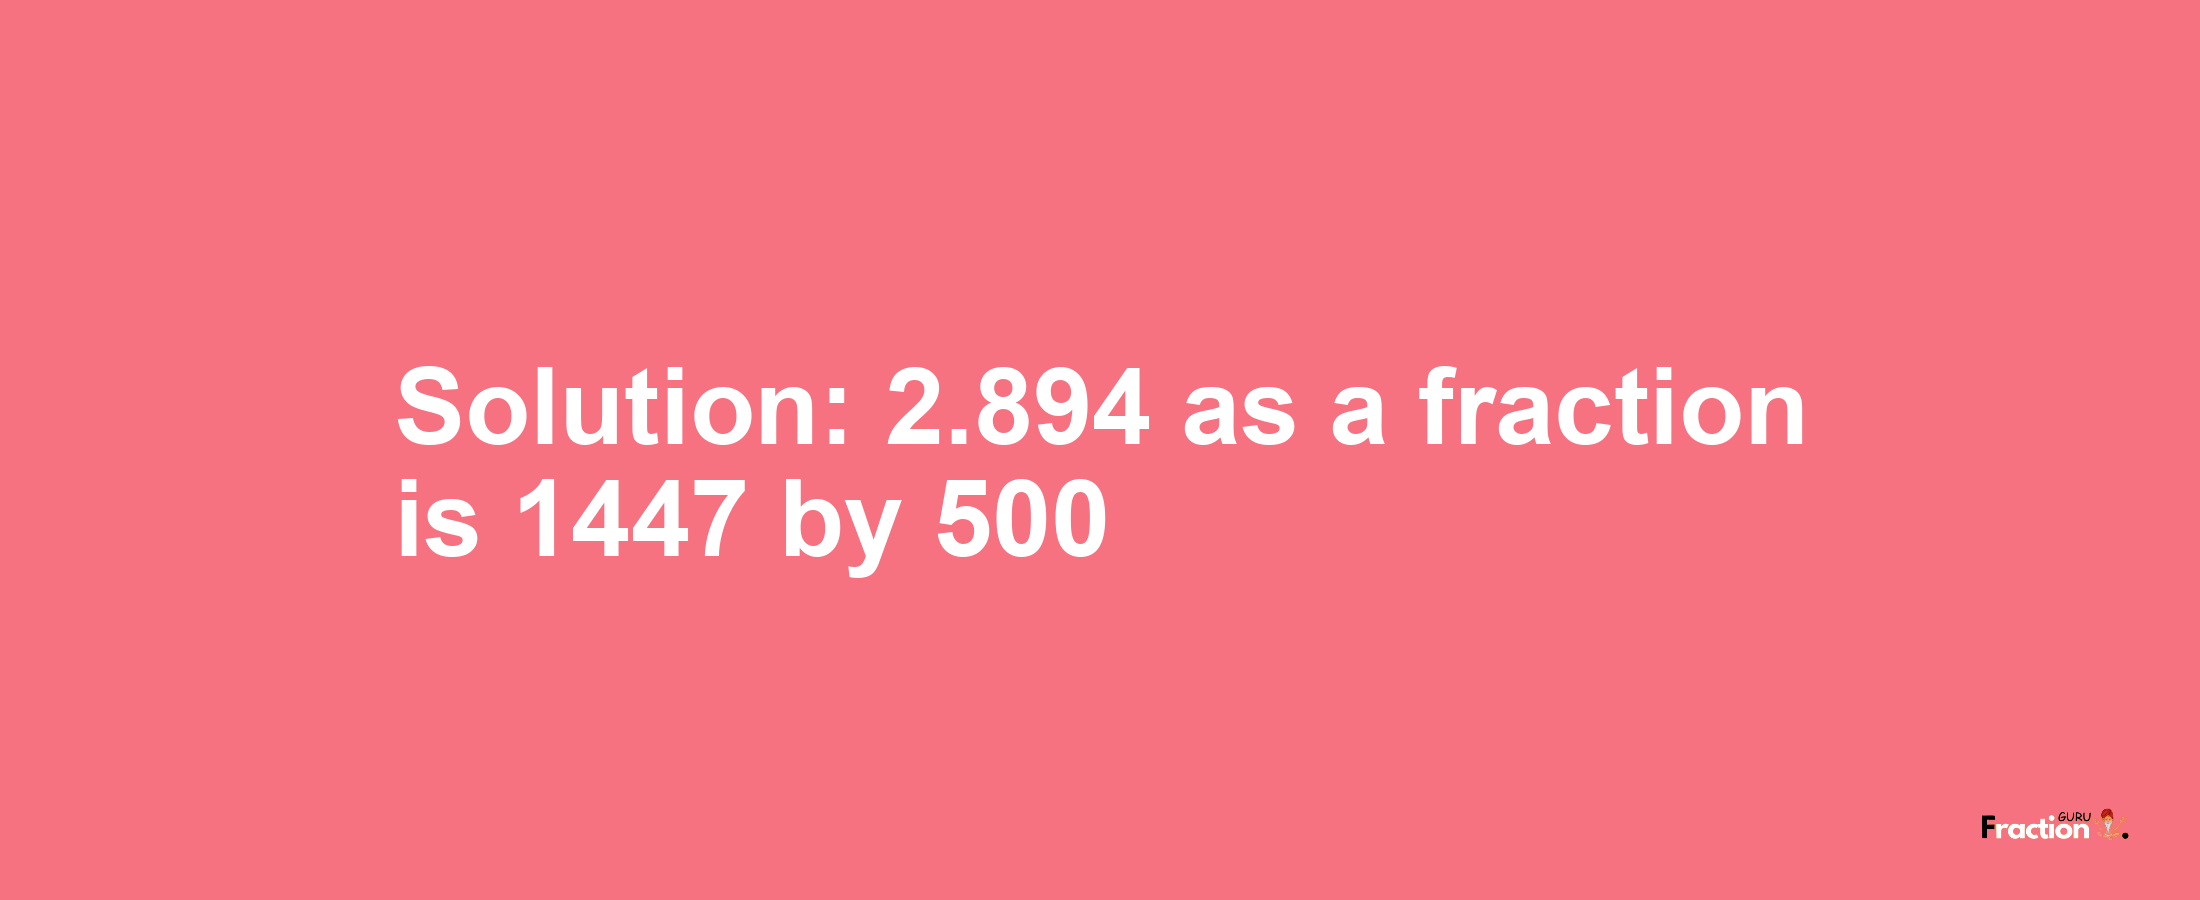 Solution:2.894 as a fraction is 1447/500